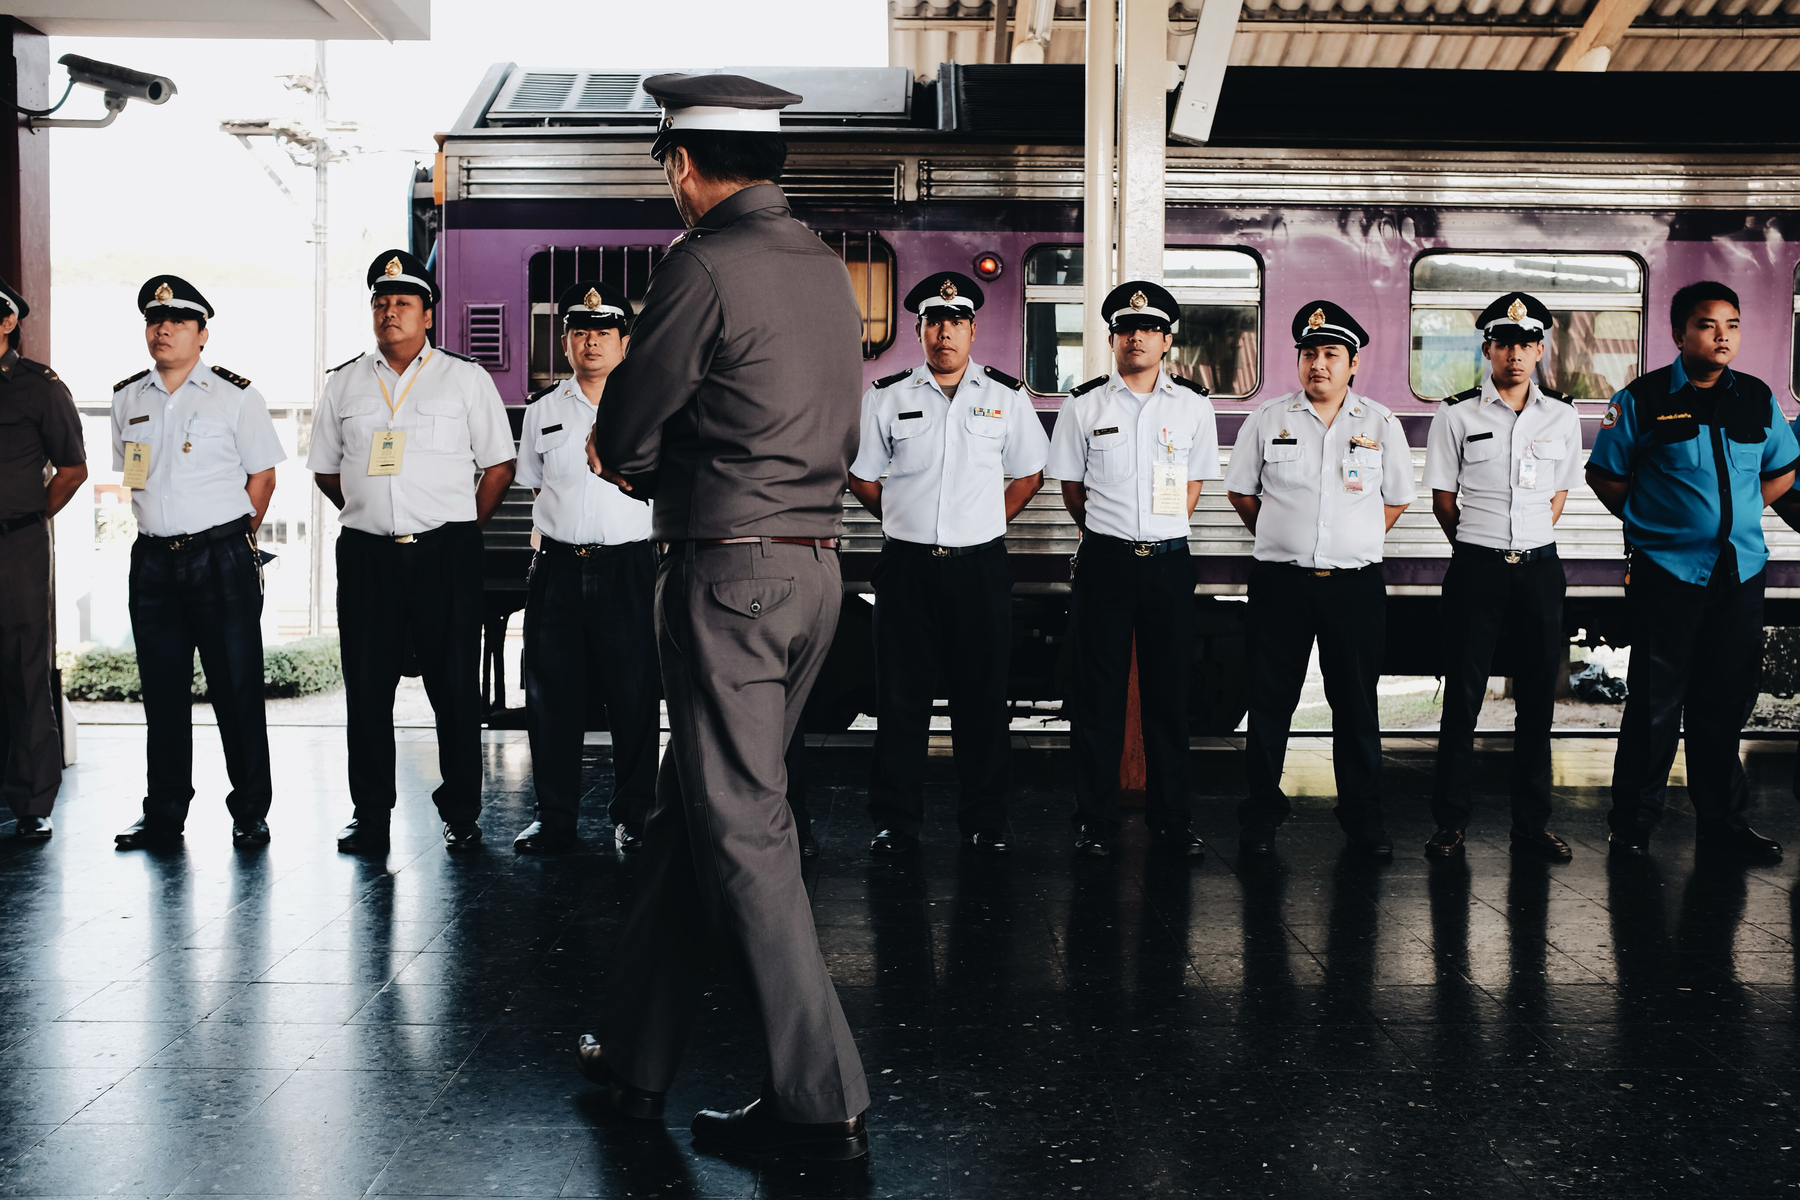 A train conductor talks with the crew before departing.